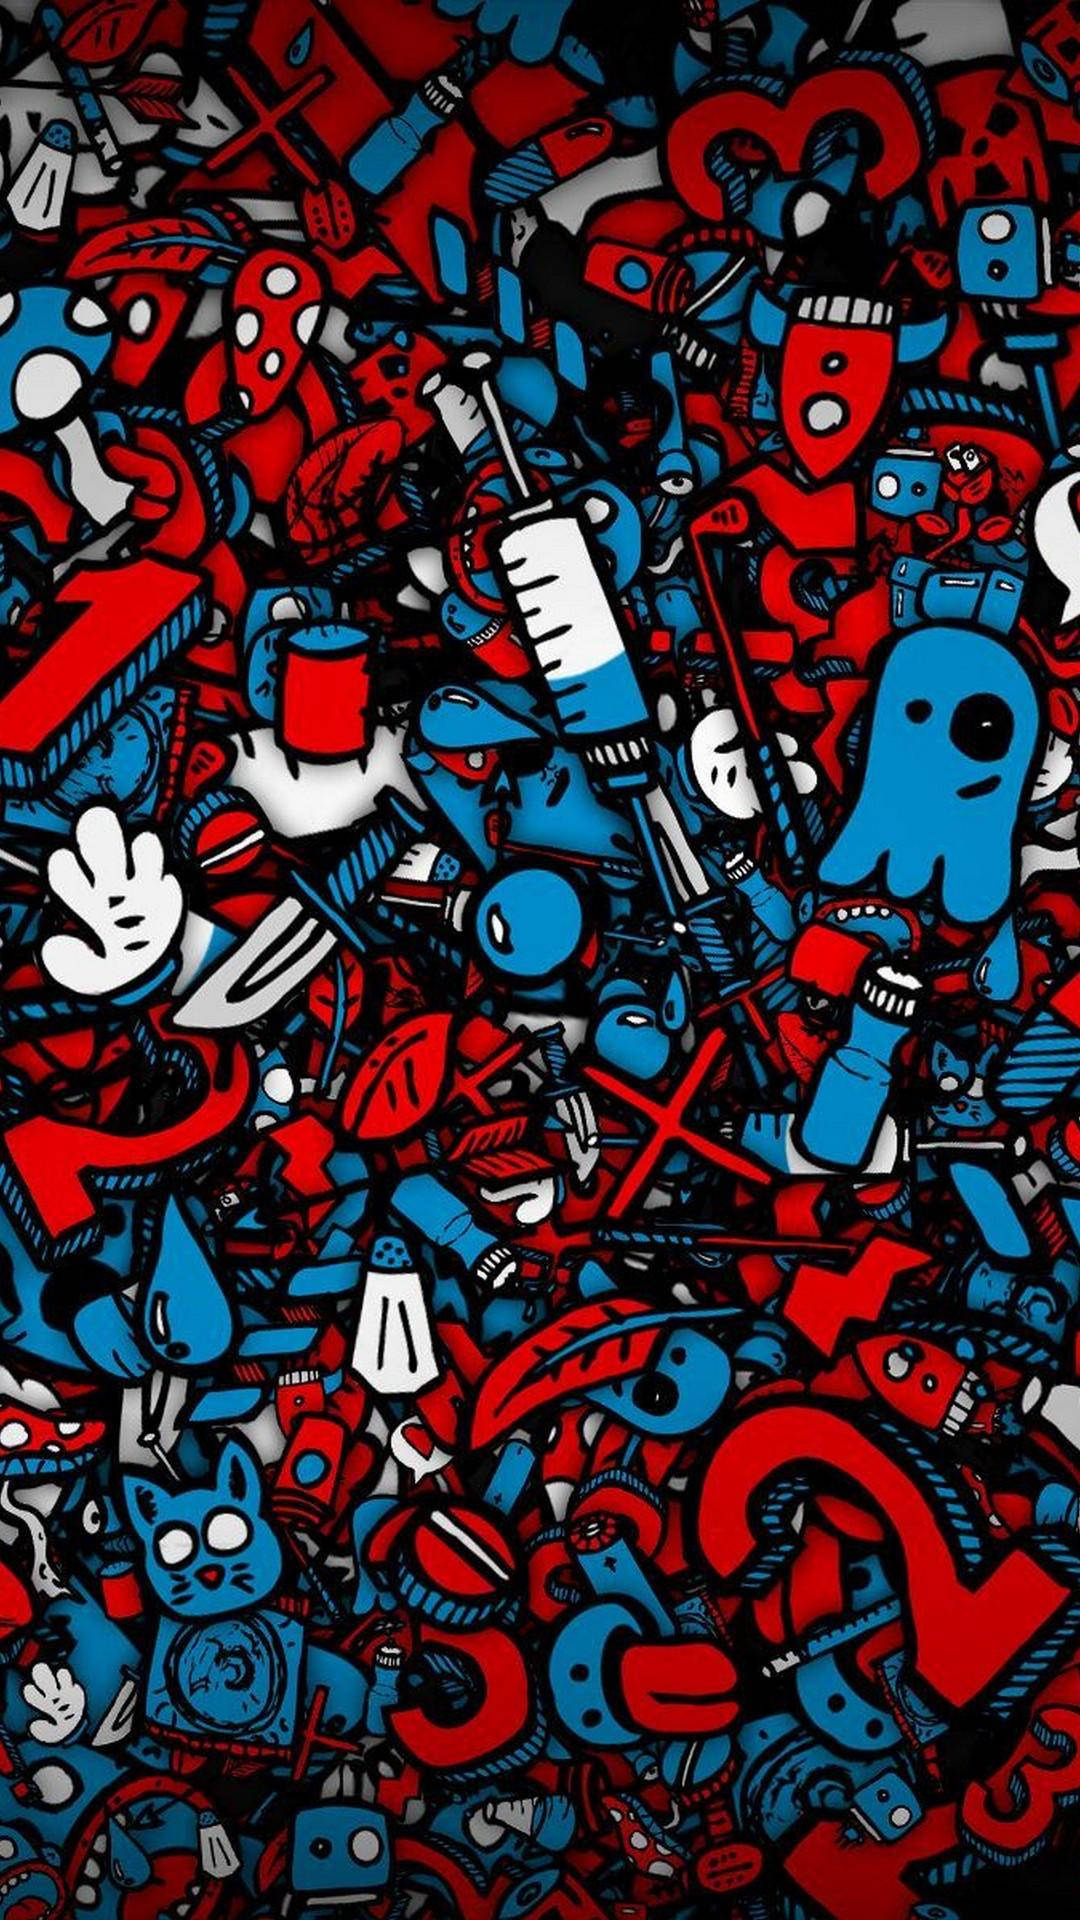 Red And Blue Abstract Wall Graffiti Iphone Background